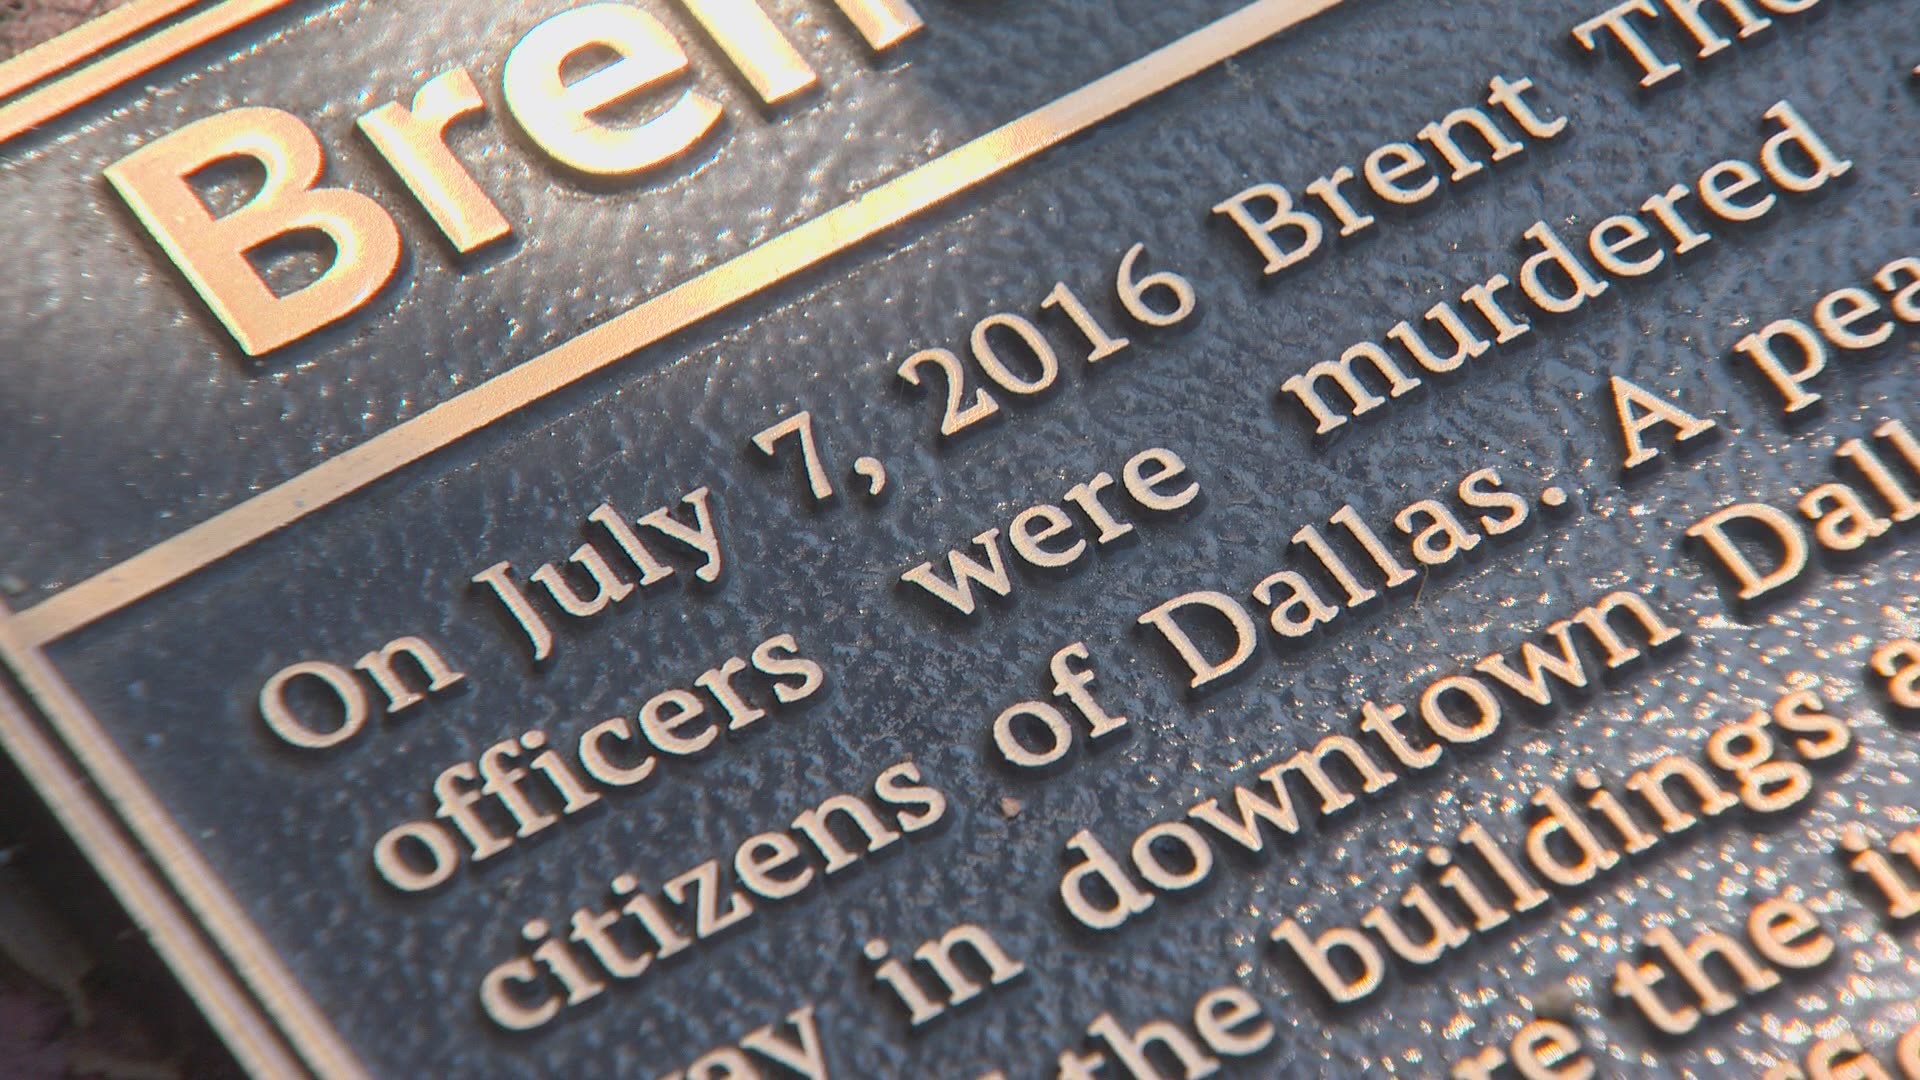 Five years ago, five officers were killed in the line of duty during an ambush in downtown Dallas.